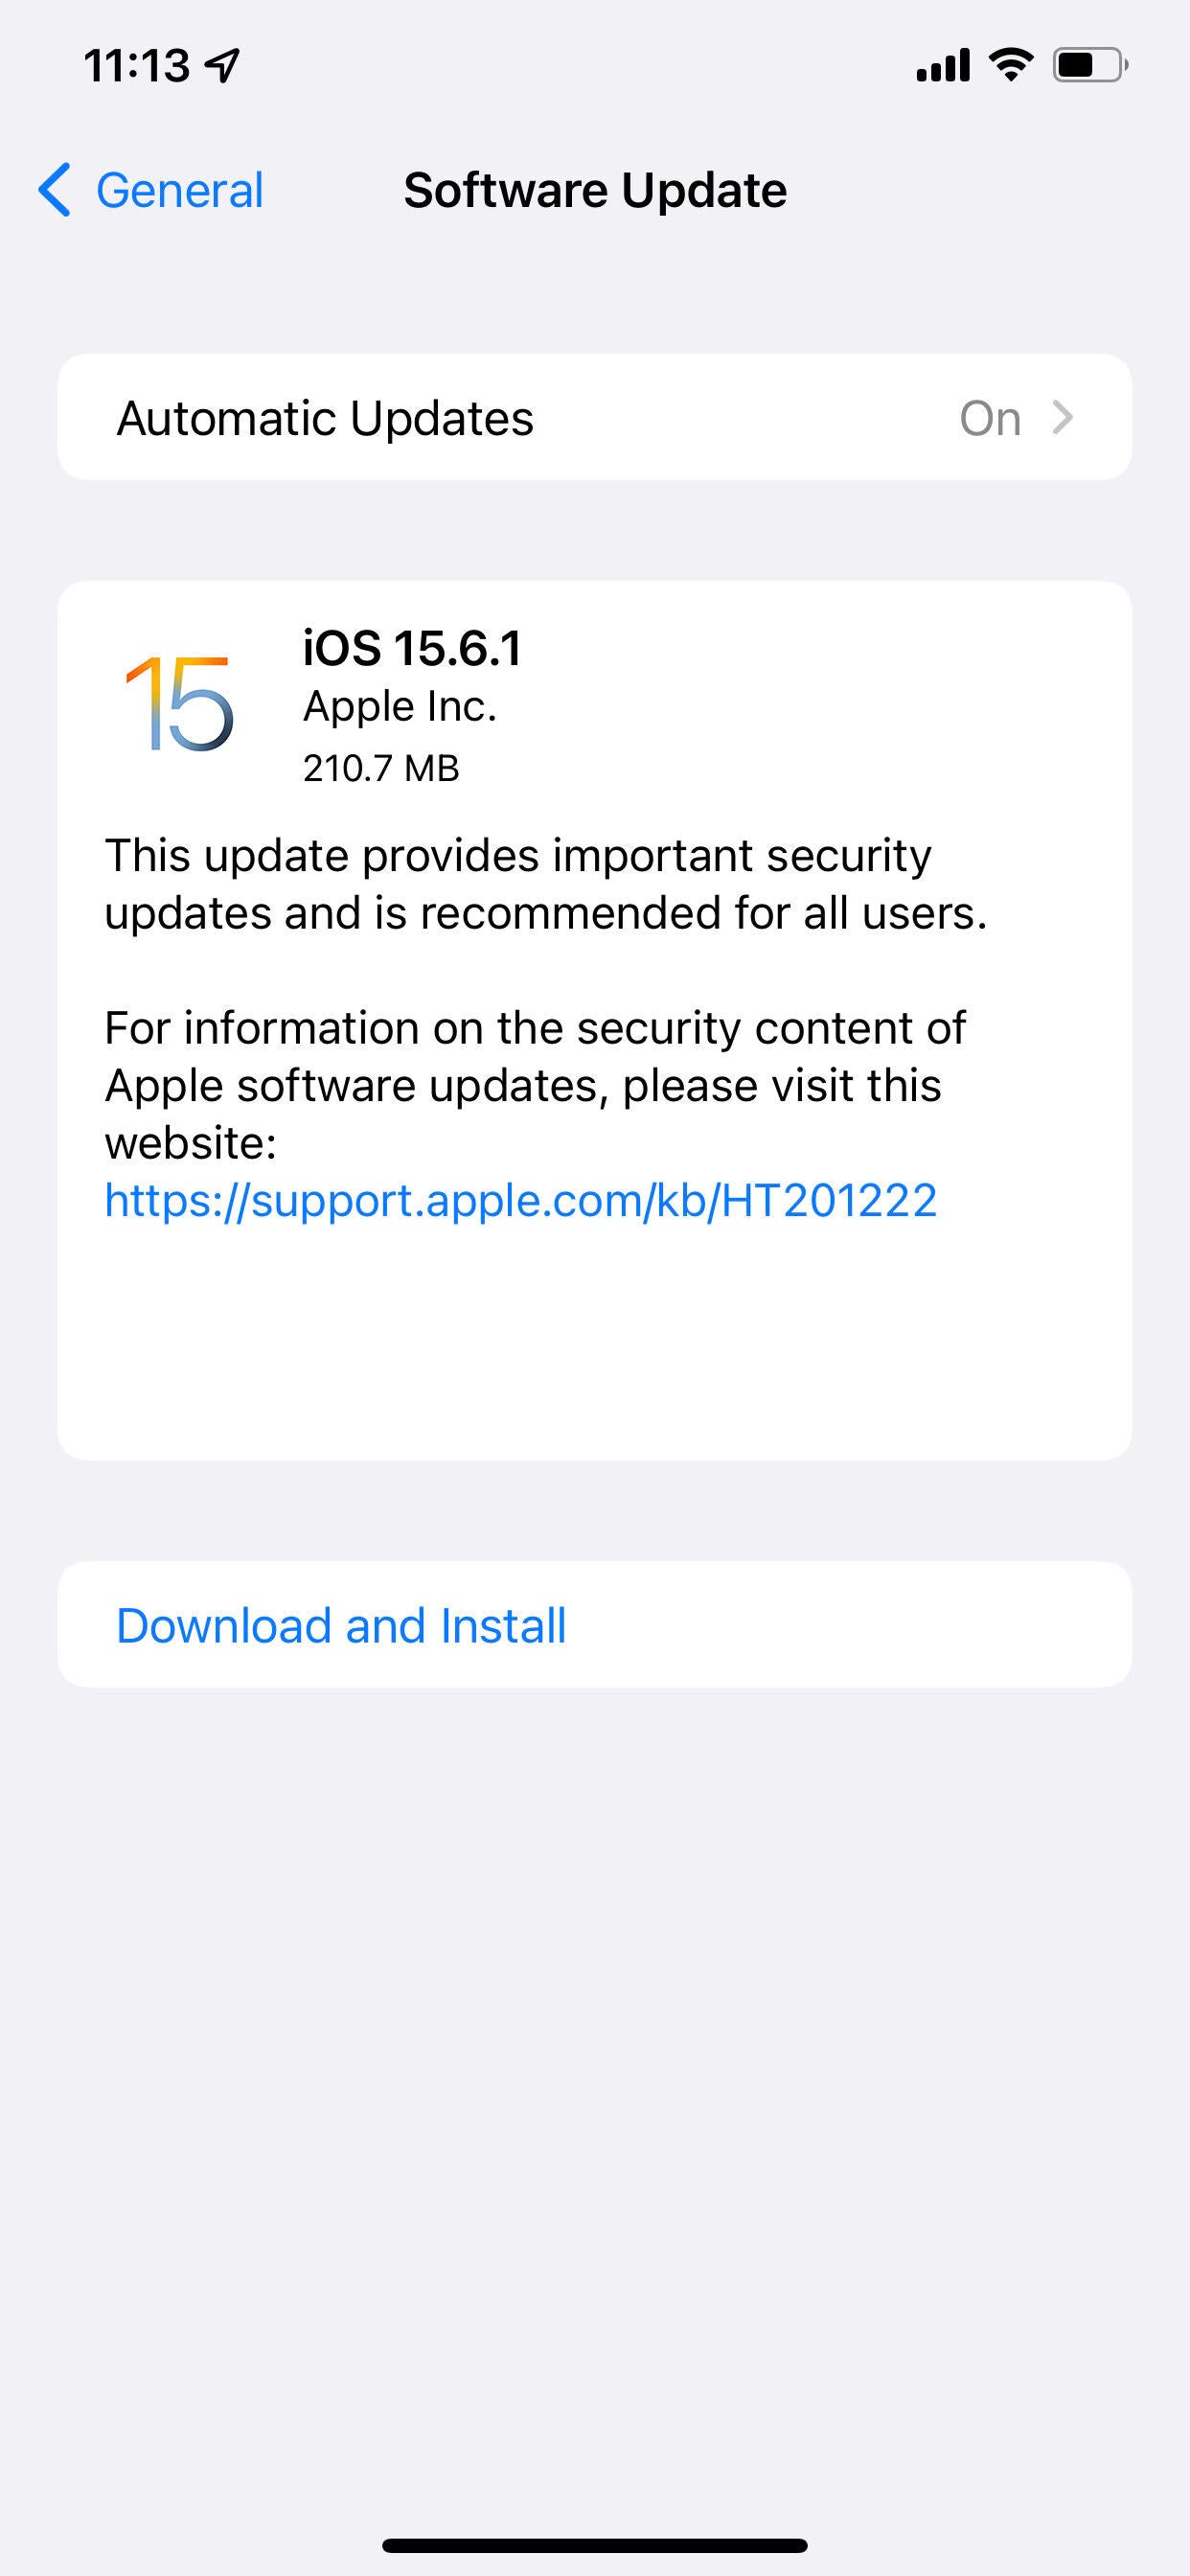 Update your iPhone and iPad to iOS 15.6.1 to patch a major vulnerability - Check to see if you need to update your iPhone, iPad, iPod touch and Mac right now!